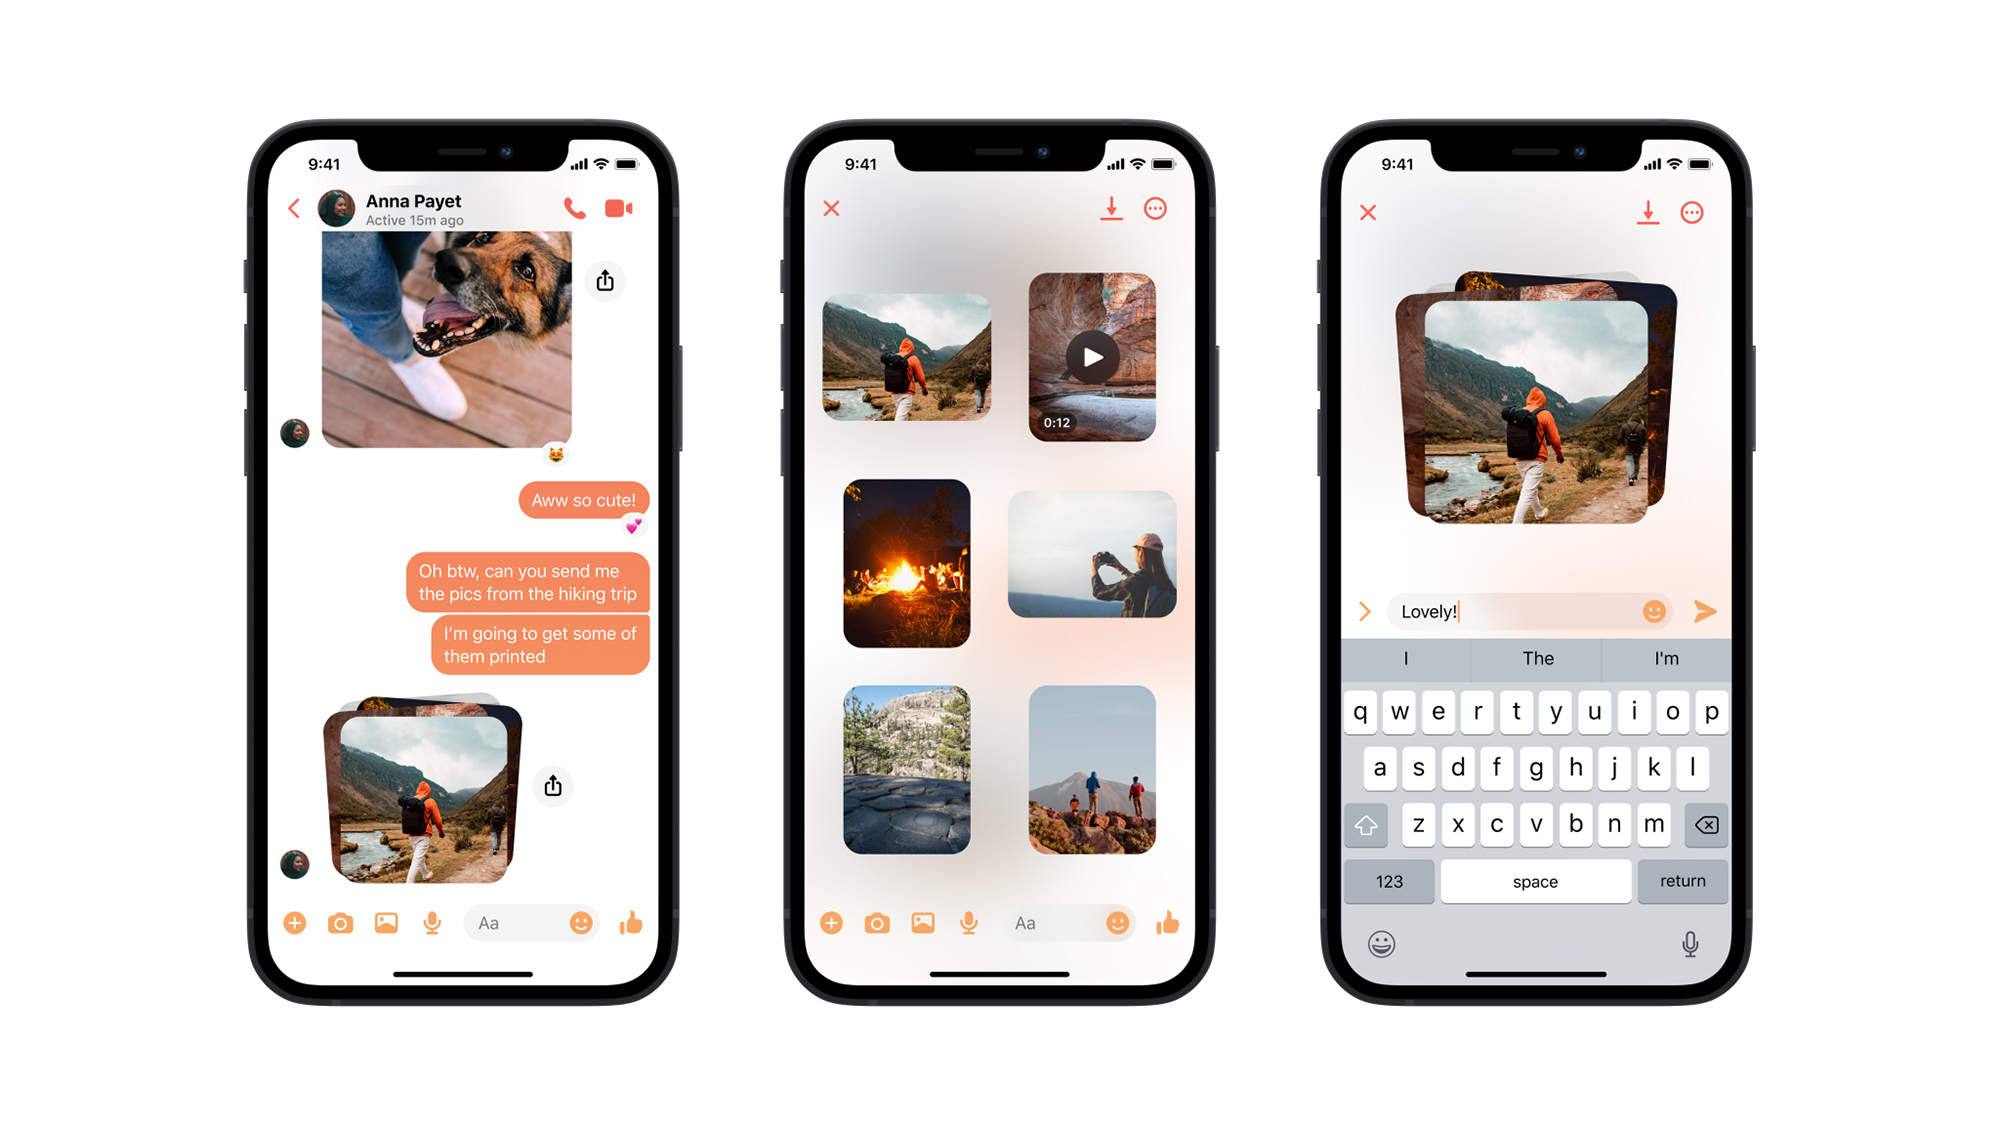 Photo layouts in the Facebook Messenger app